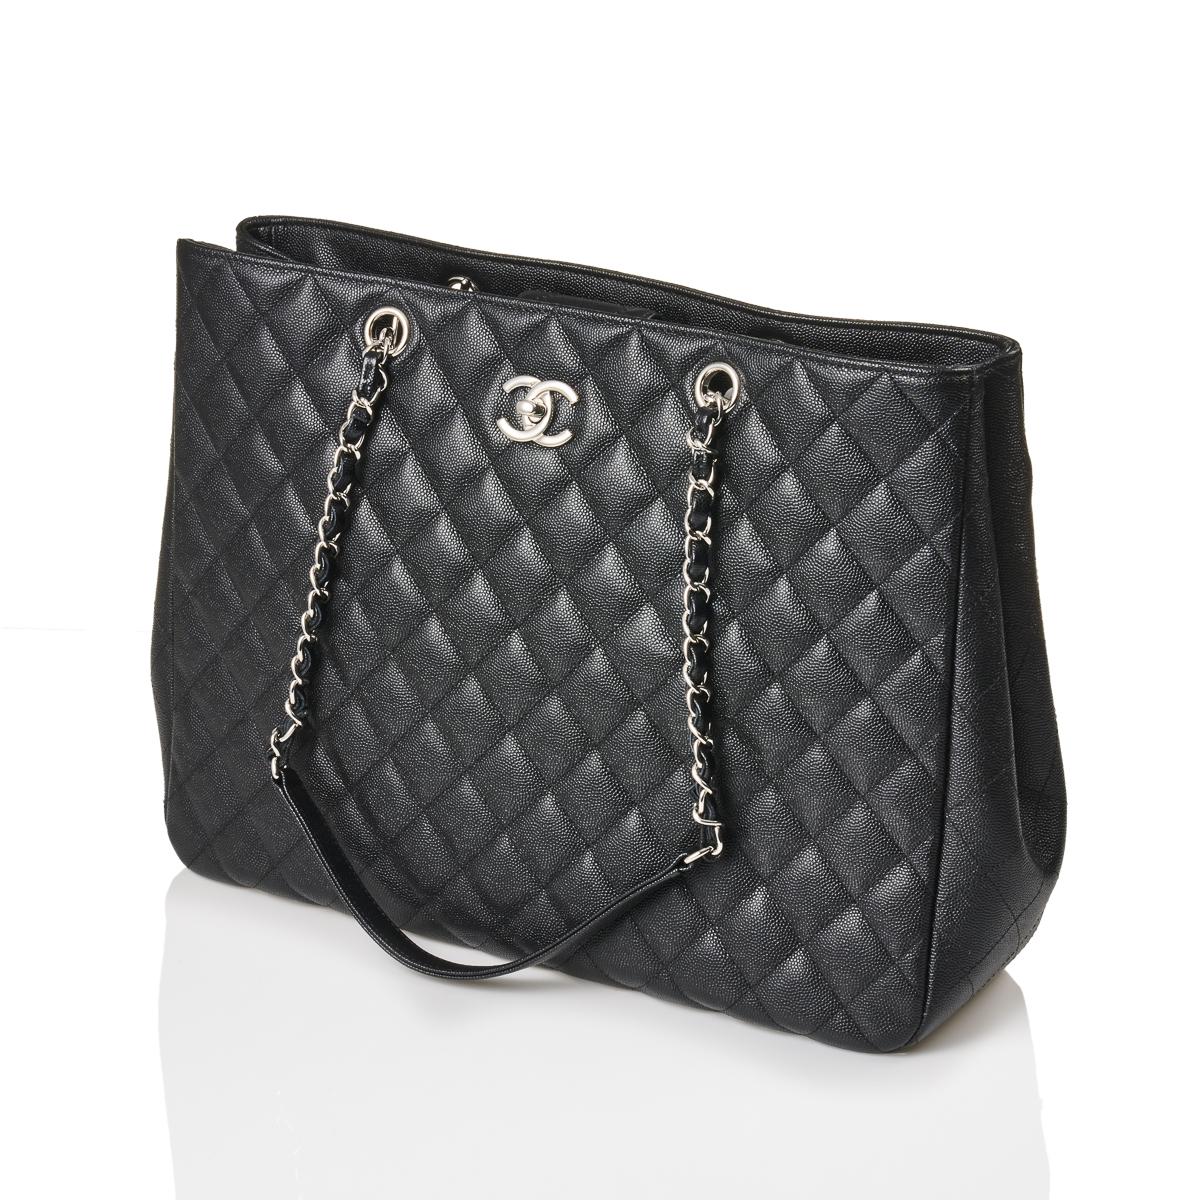 Chanel Caviar Large Classic Shopping Tote Bag